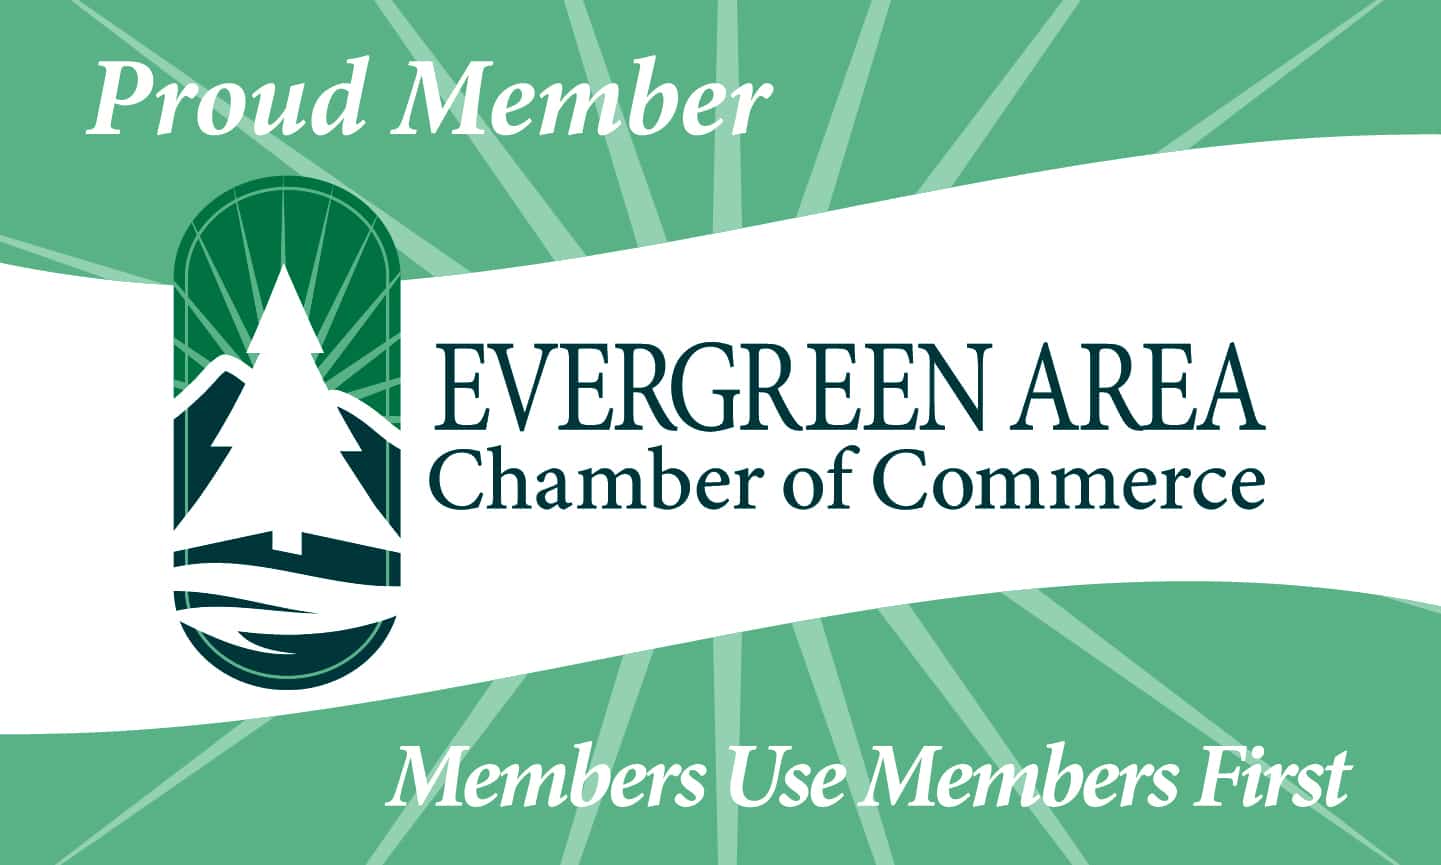 We are Proud Members of the Evergreen Chamber of Commerce